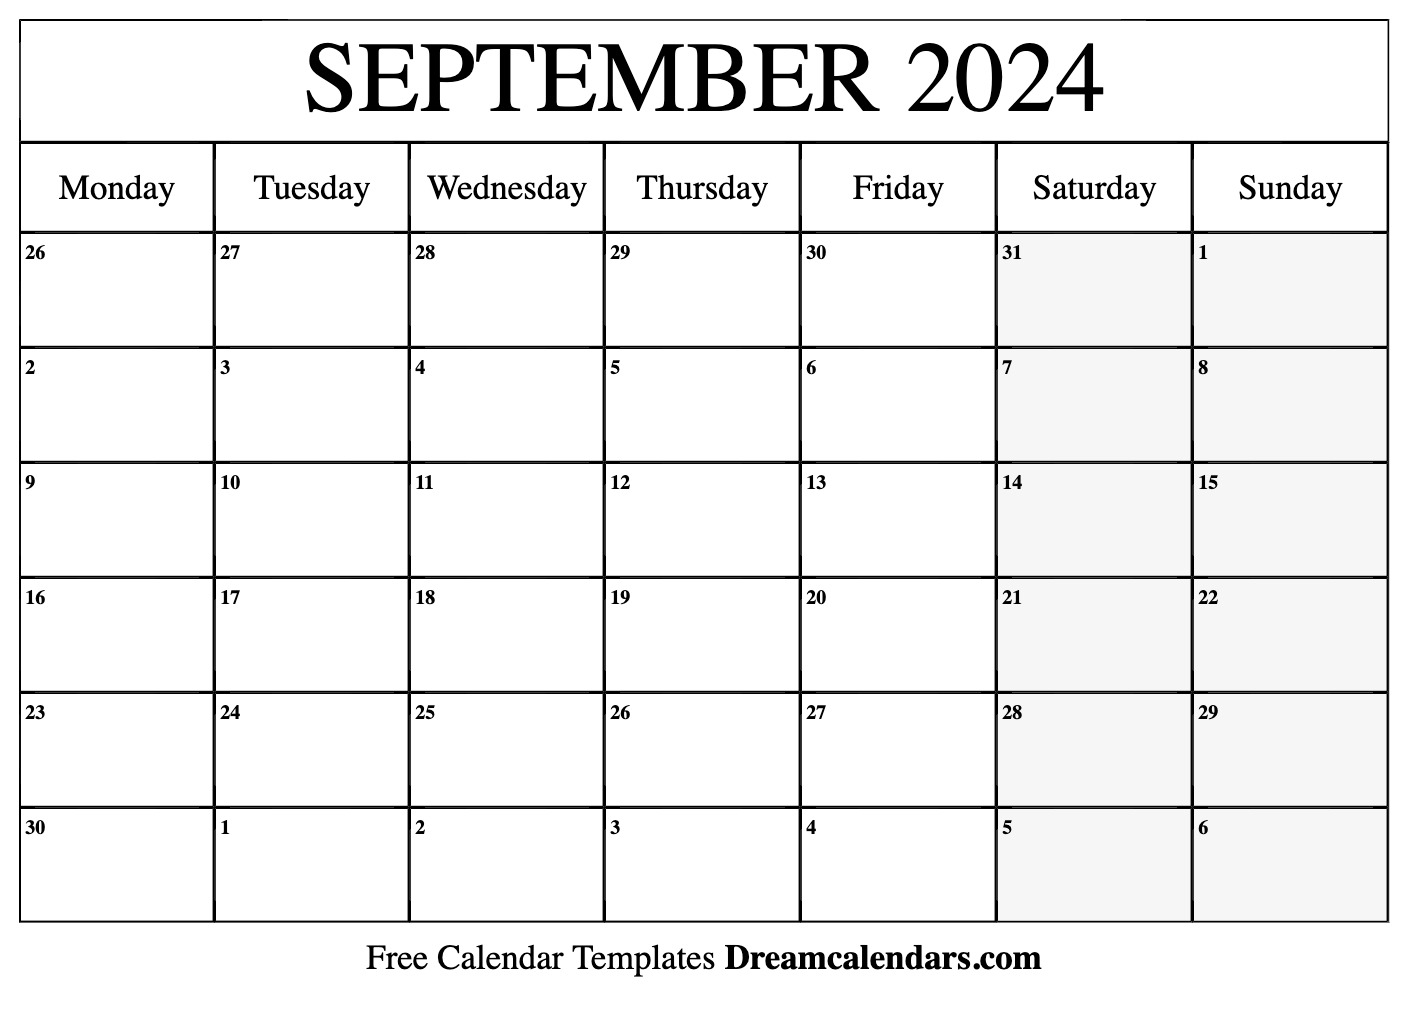 September 2024 Calendar Free Printable with Holidays and Observances